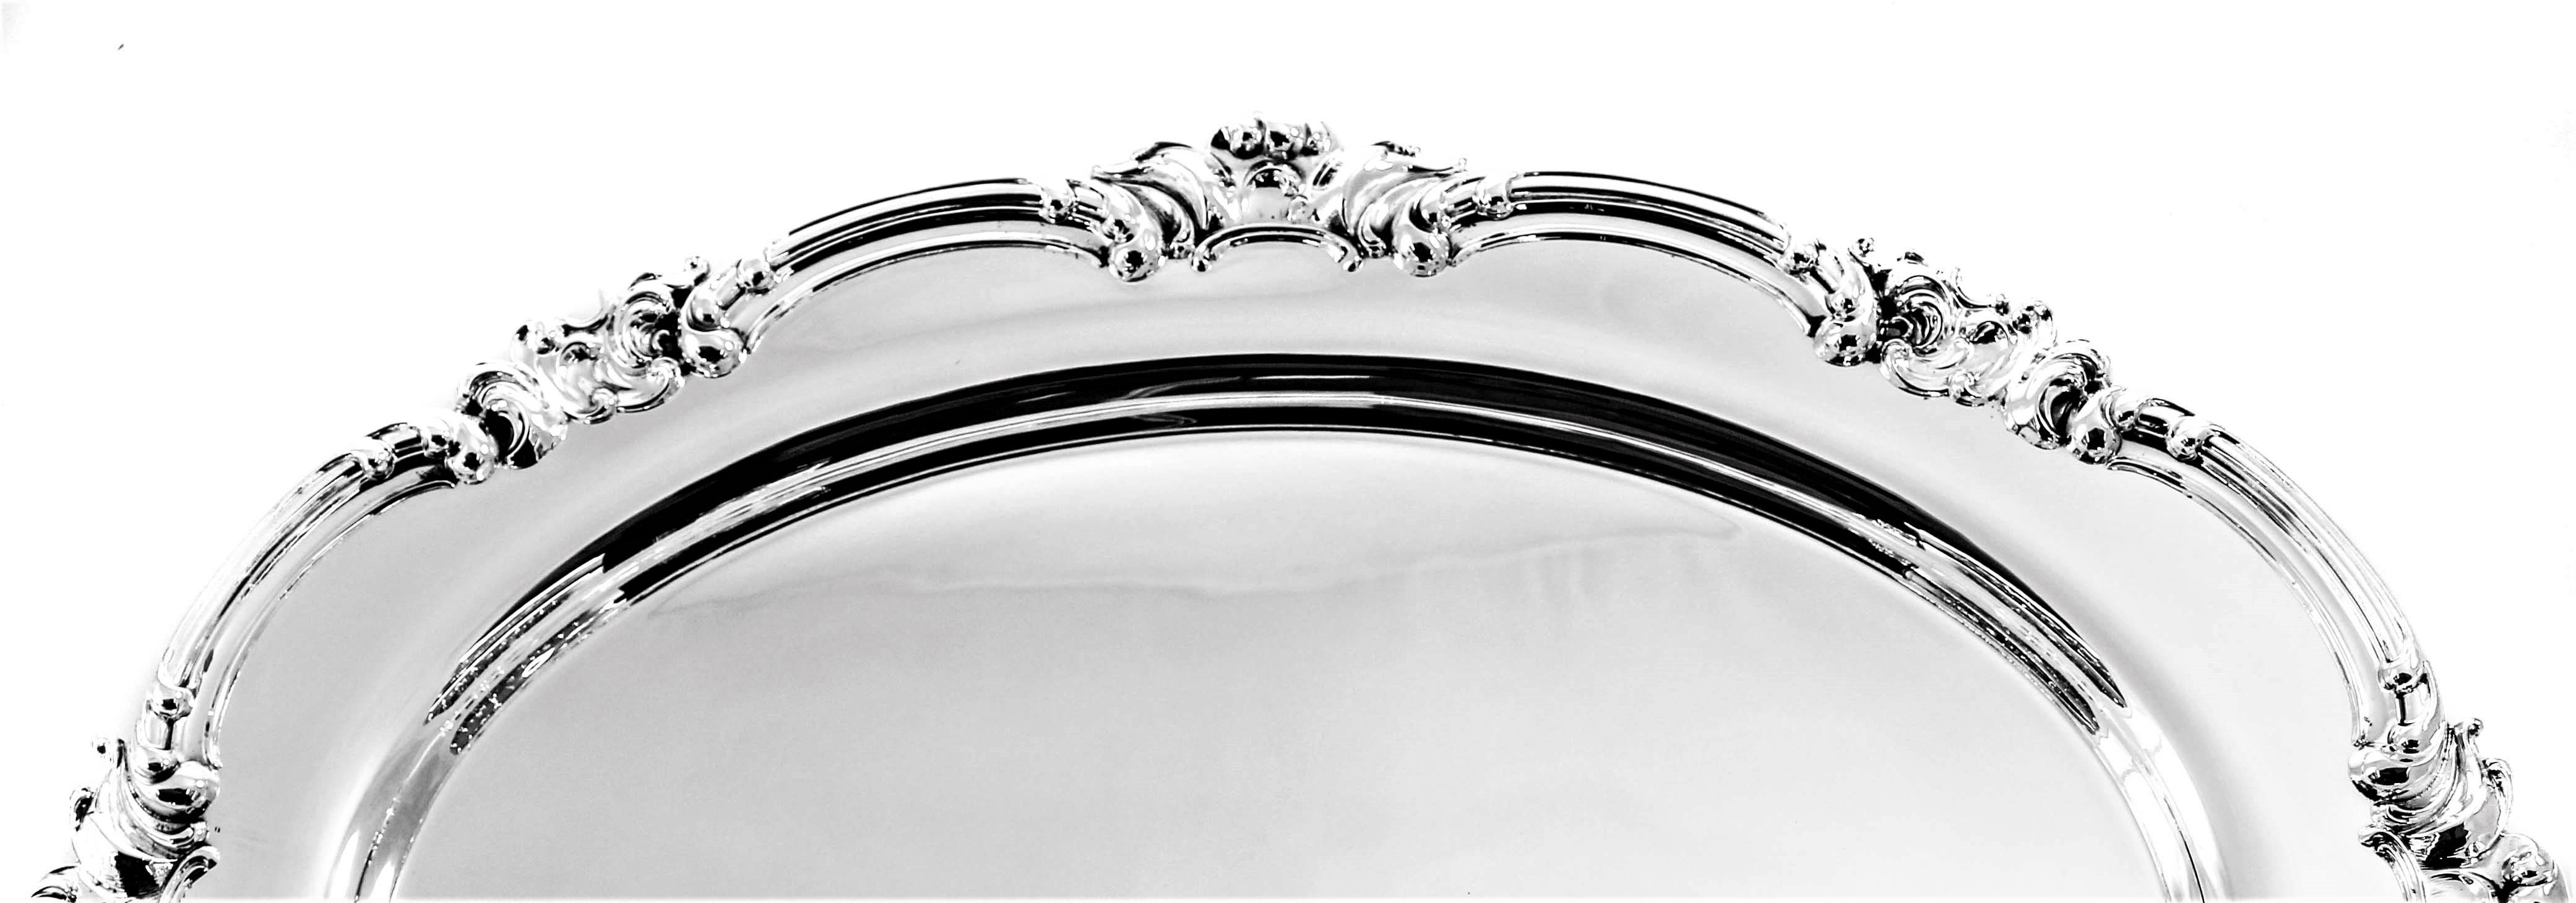 If you’re looking for a large and impressive sterling platter, this is for you. It is oval in shape with a scalloped rim. Along the edge there is a decorative pattern of swirls that gives this piece a rich and ornate look. The center is flat and